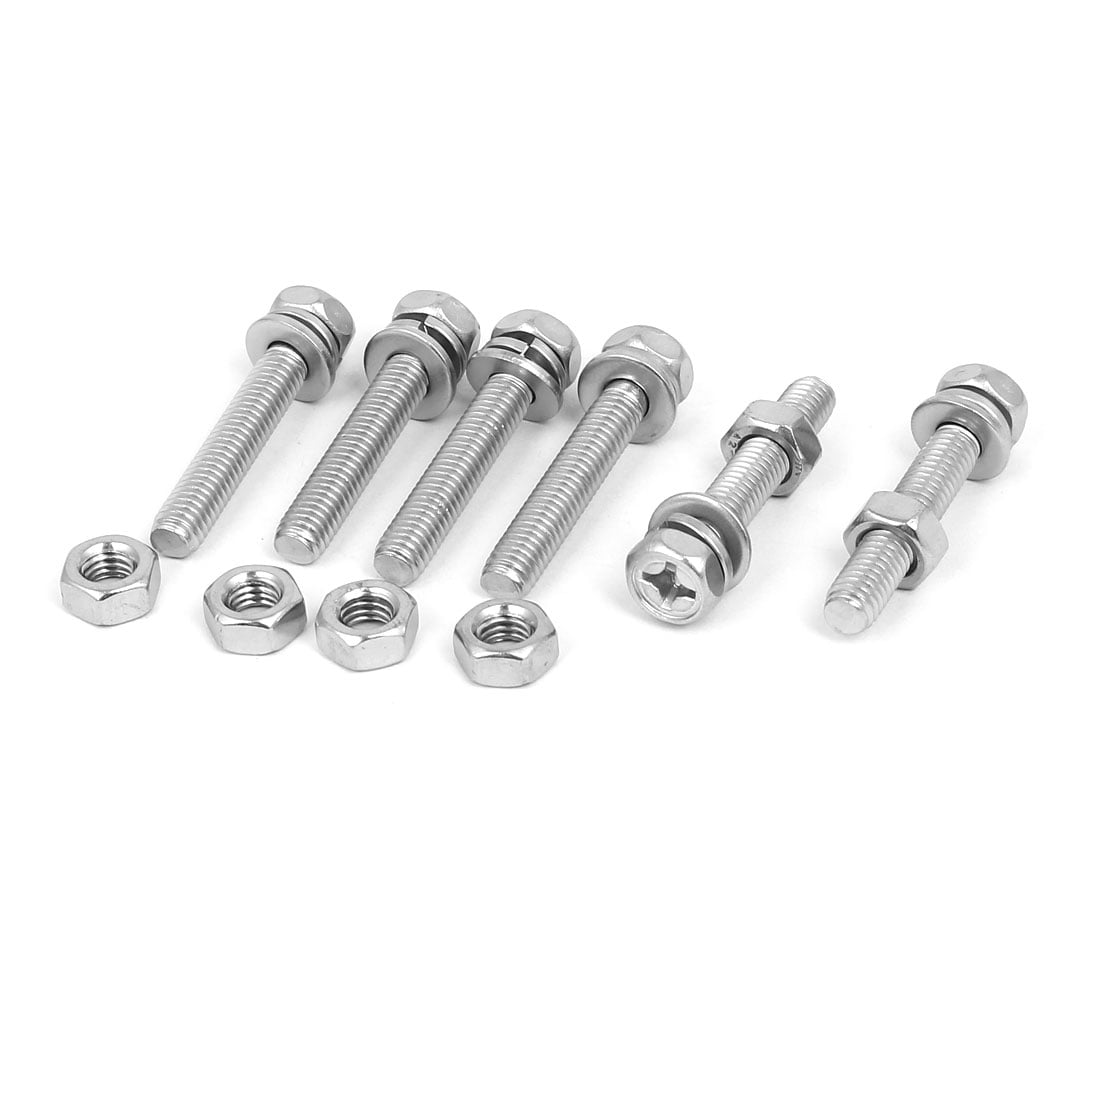 M6 HEX HEAD BOLTS HEX NUTS WASHERS A2 STAINLESS STEEL MIXED 80 PACK 